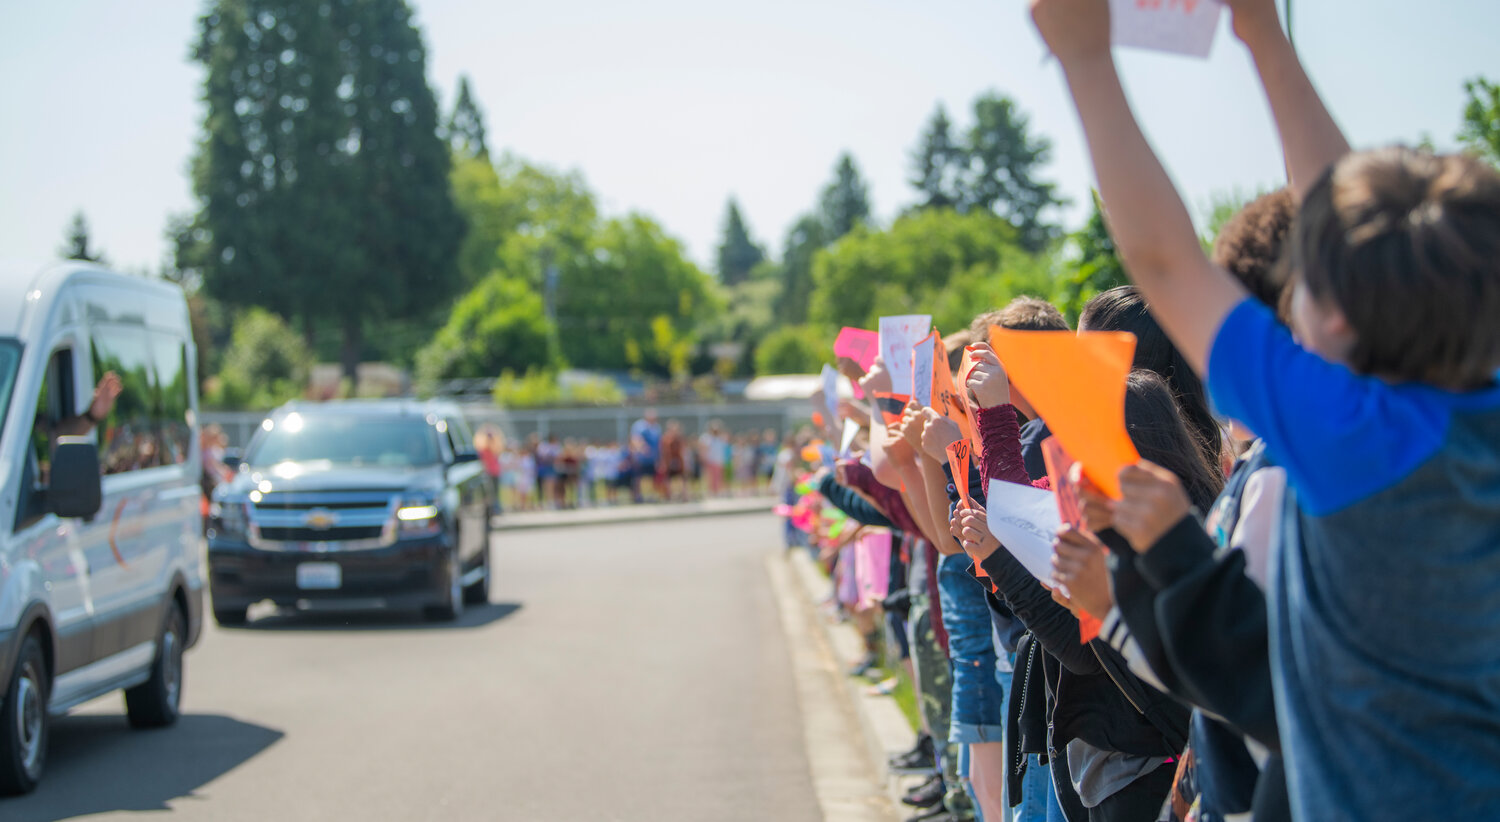 Centralia High School’s state-bound softball team parades through the parking lot of Fords Prairie Elementary and is greeted by signs and cheering on Thursday.